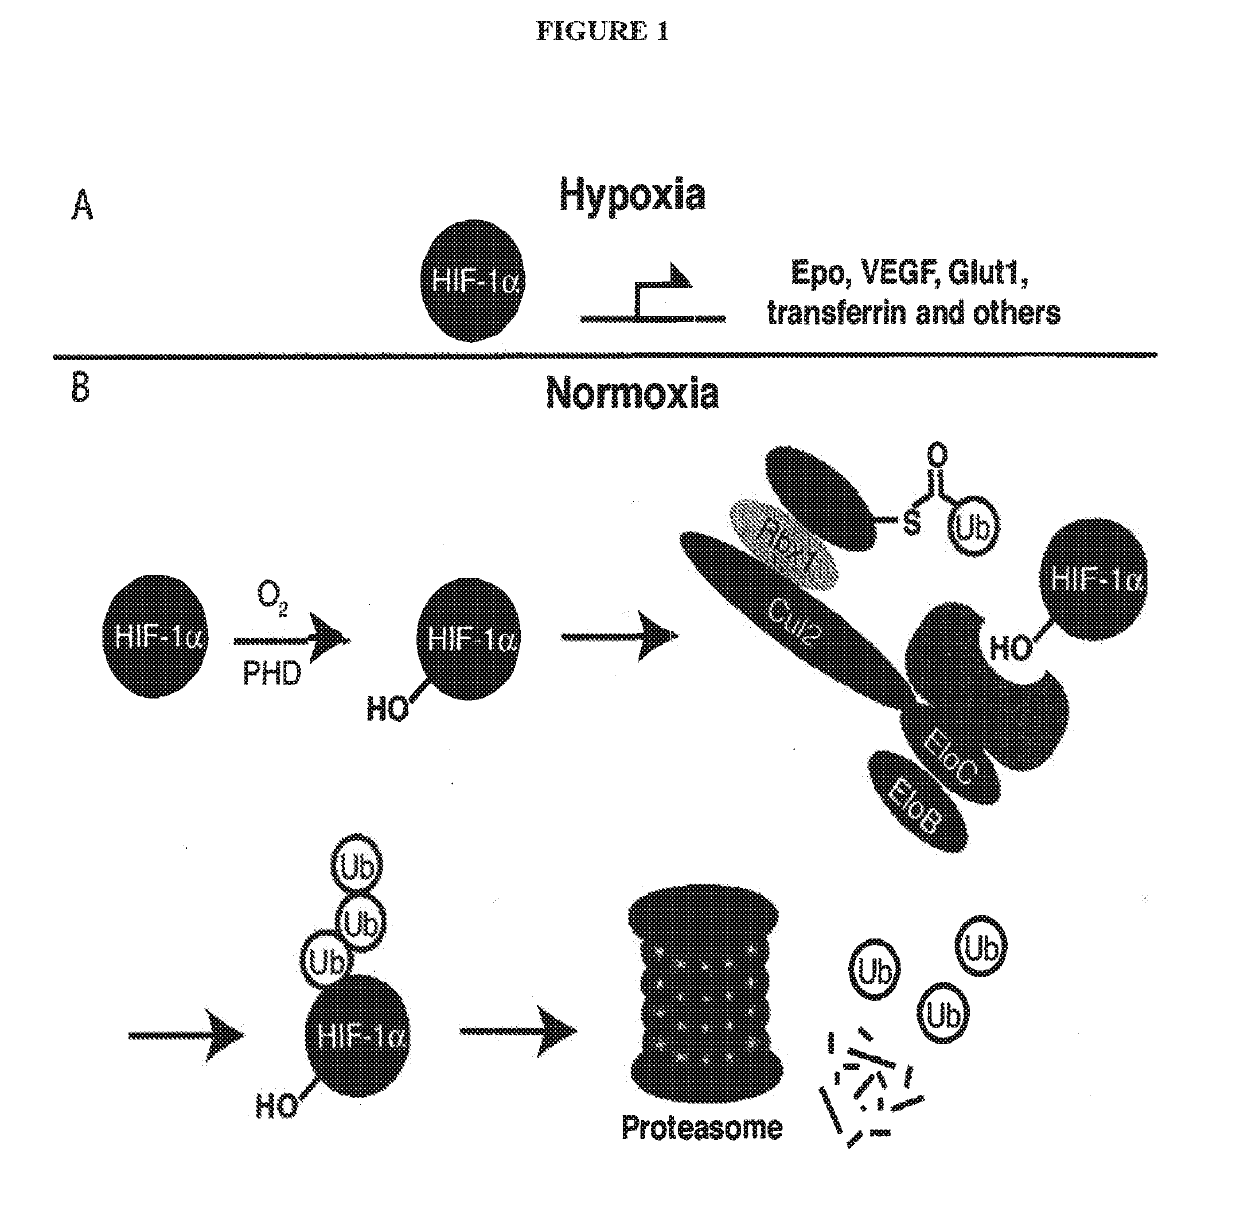 Compounds & Methods for the Enhanced Degradation of Targeted Proteins & Other Polypeptides by an E3 Ubiquitin Ligase